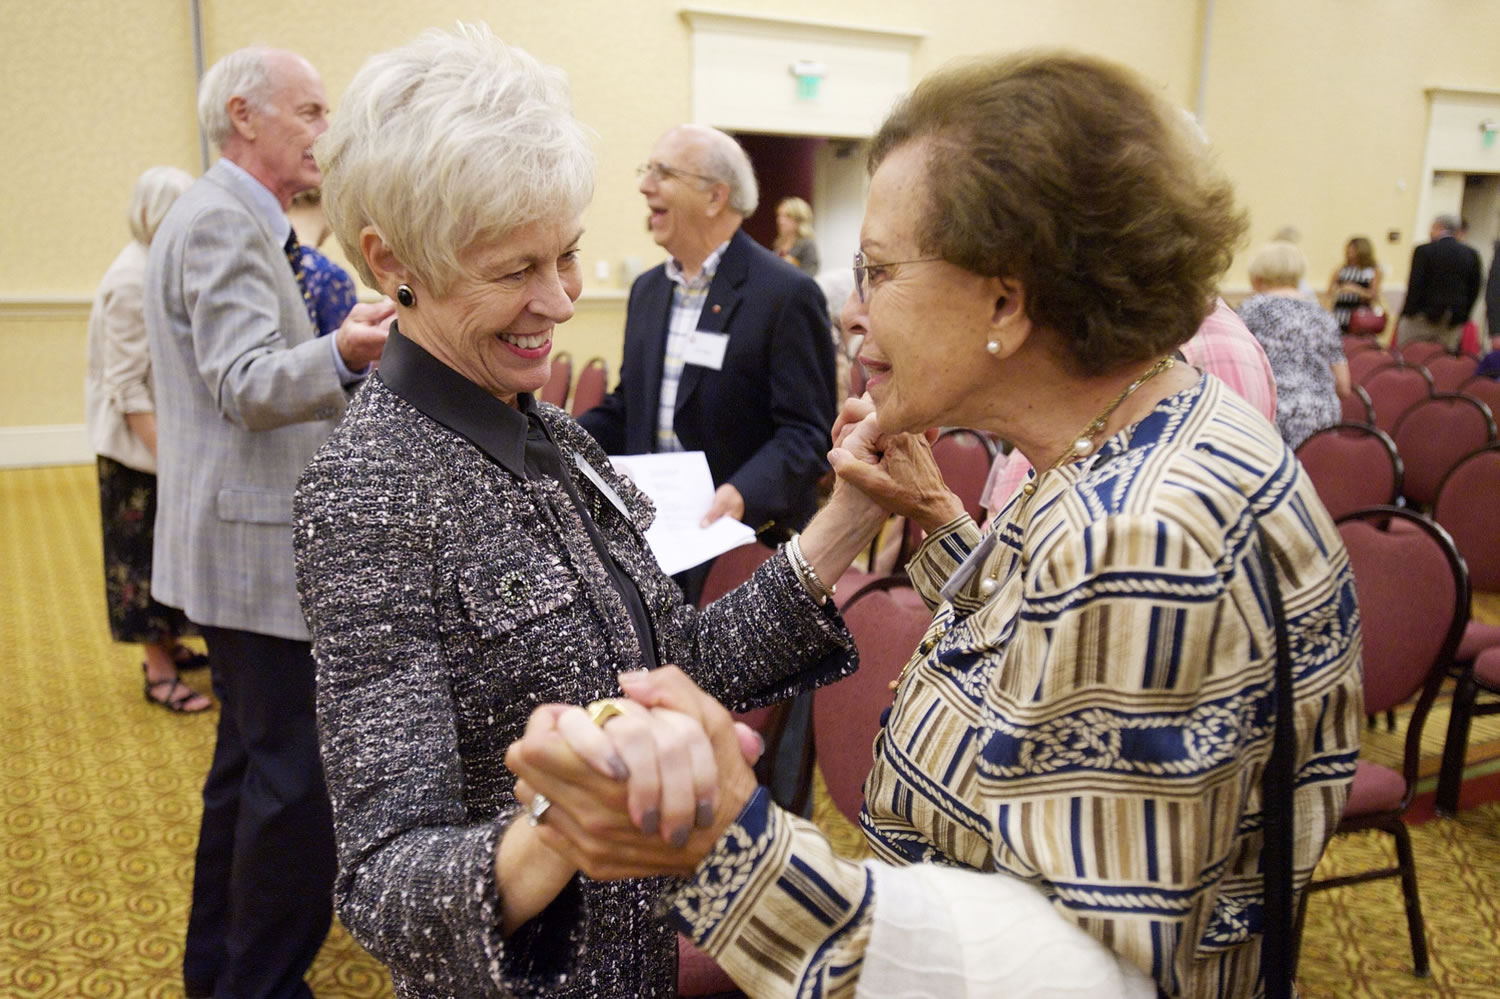 Photos by Steven Lane/The Columbian
Clark County First Citizen for 2014 Twyla Barnes, left, greets Maria Bigelow after her award ceremony at the Hilton Vancouver Washington on Tuesday. Barnes was noted for big-picture leadership while making every person she worked with feel special.